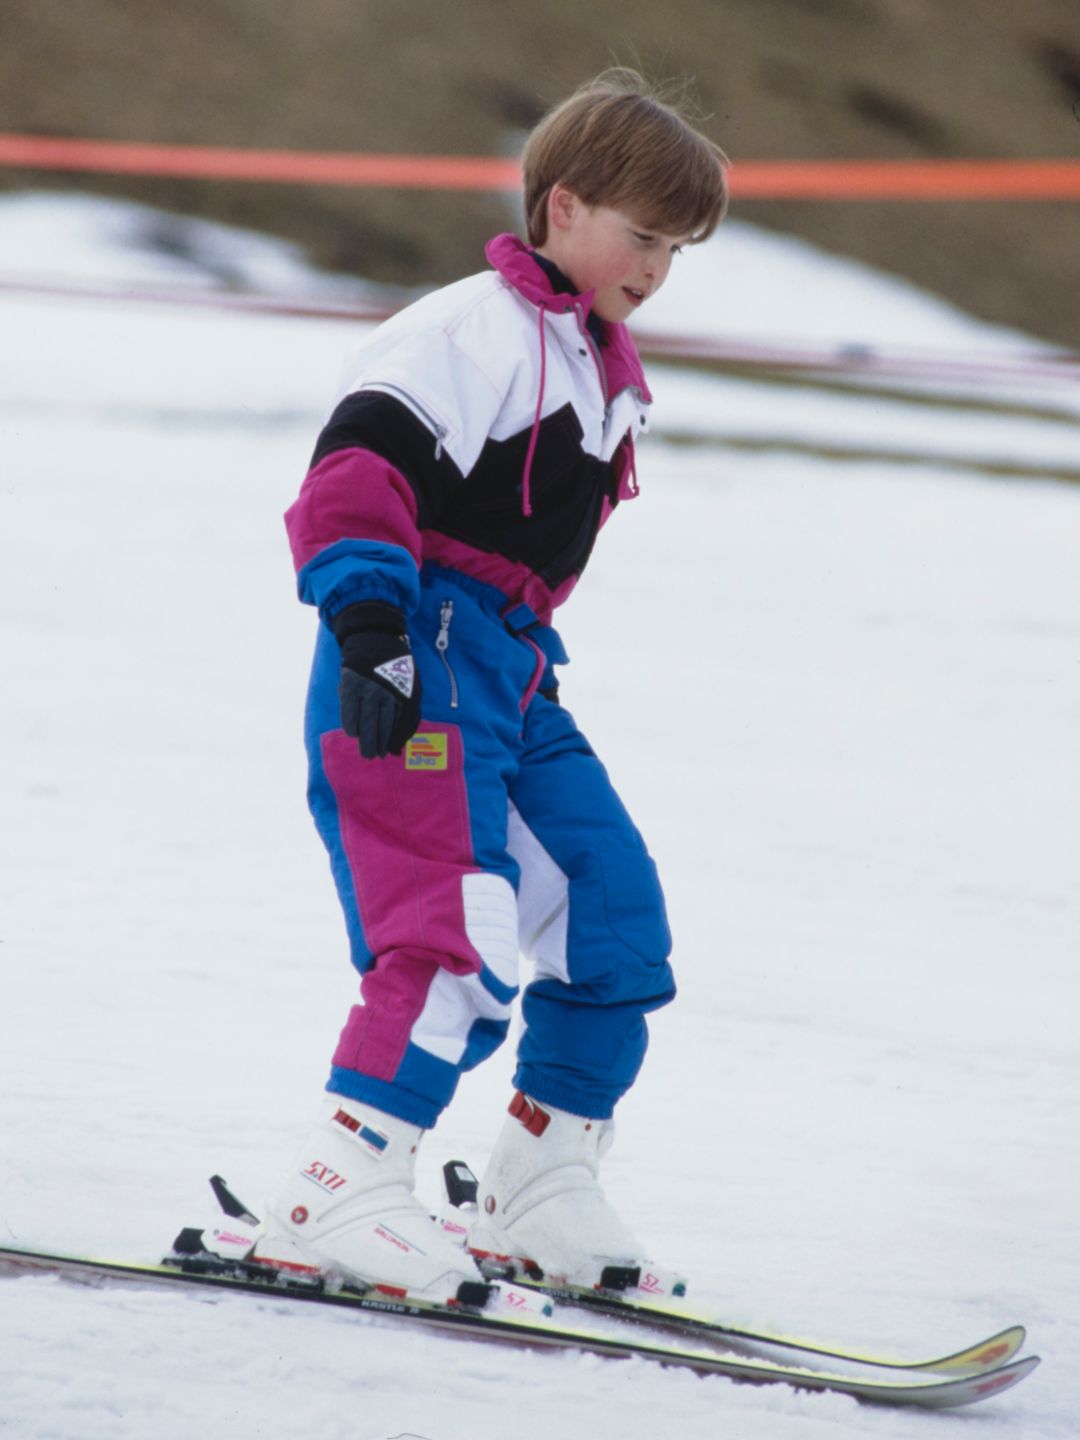 Prince William, wearing a blue, pink, black and white ski suit, during a ski holiday in Lech, Austria in 1991